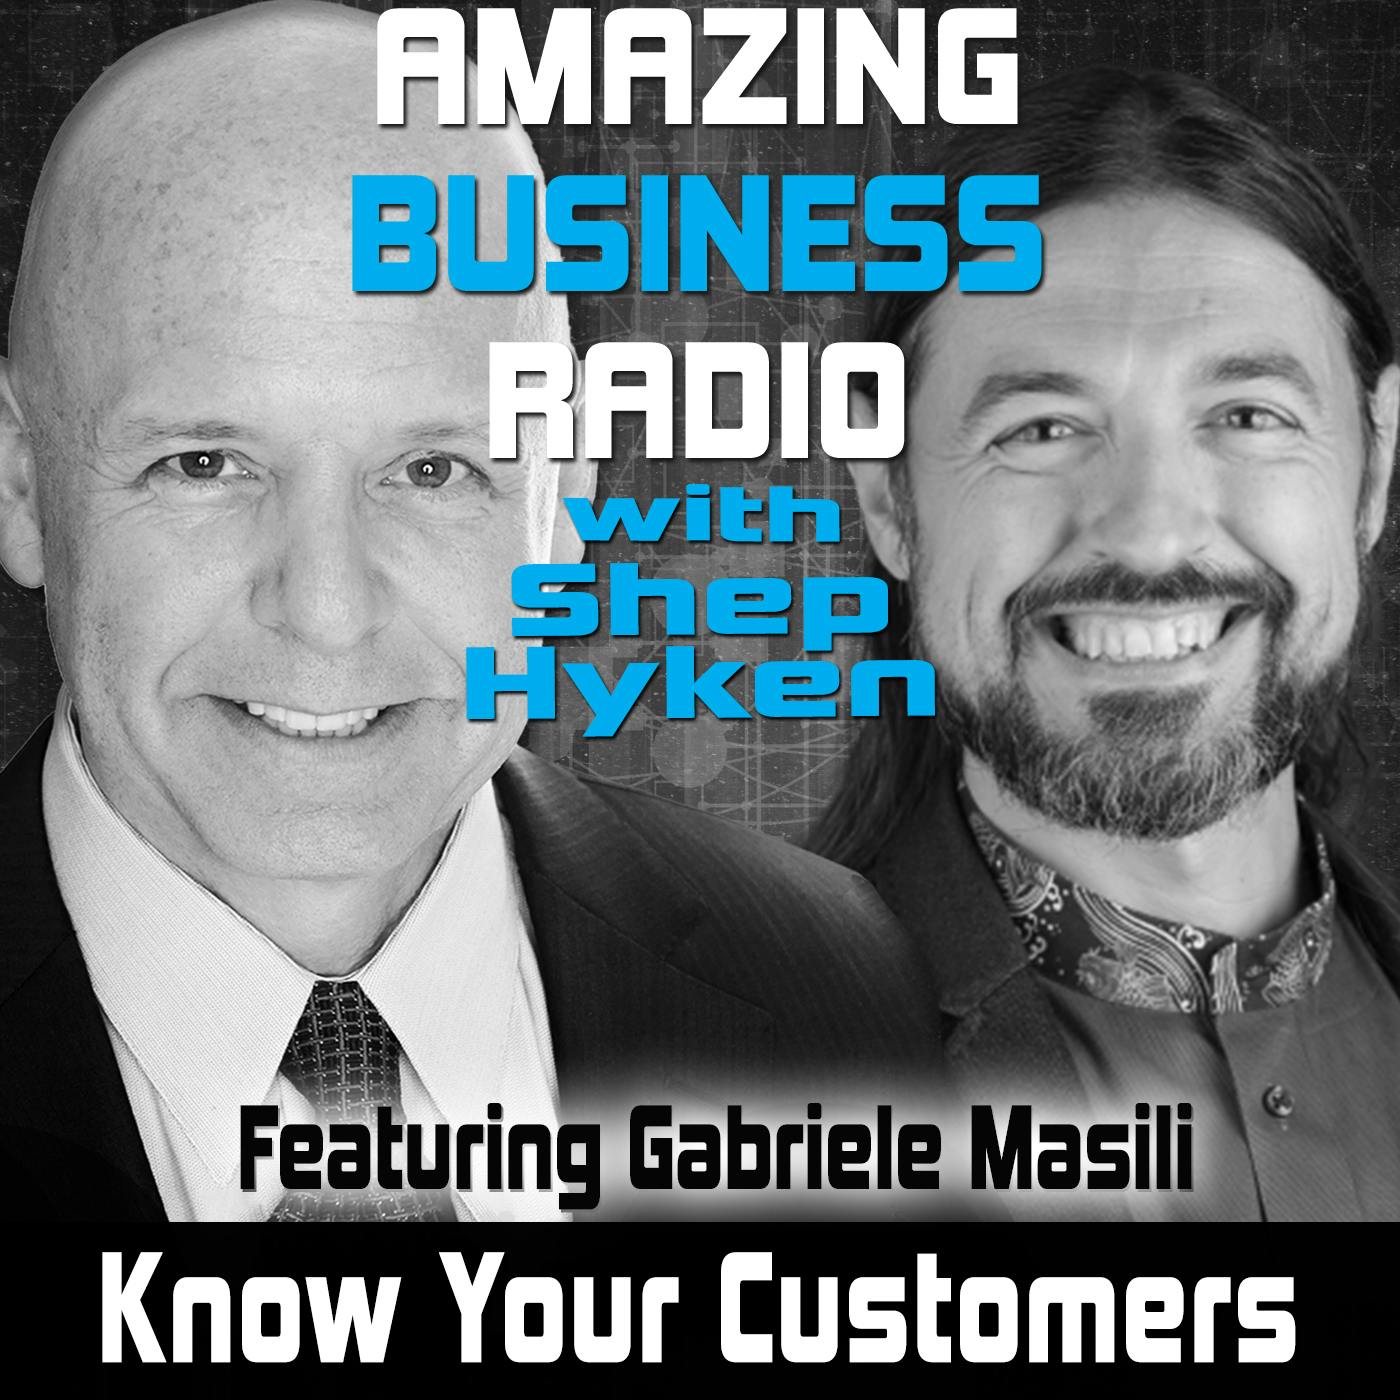 Know Your Customers Featuring Gabriele Masili